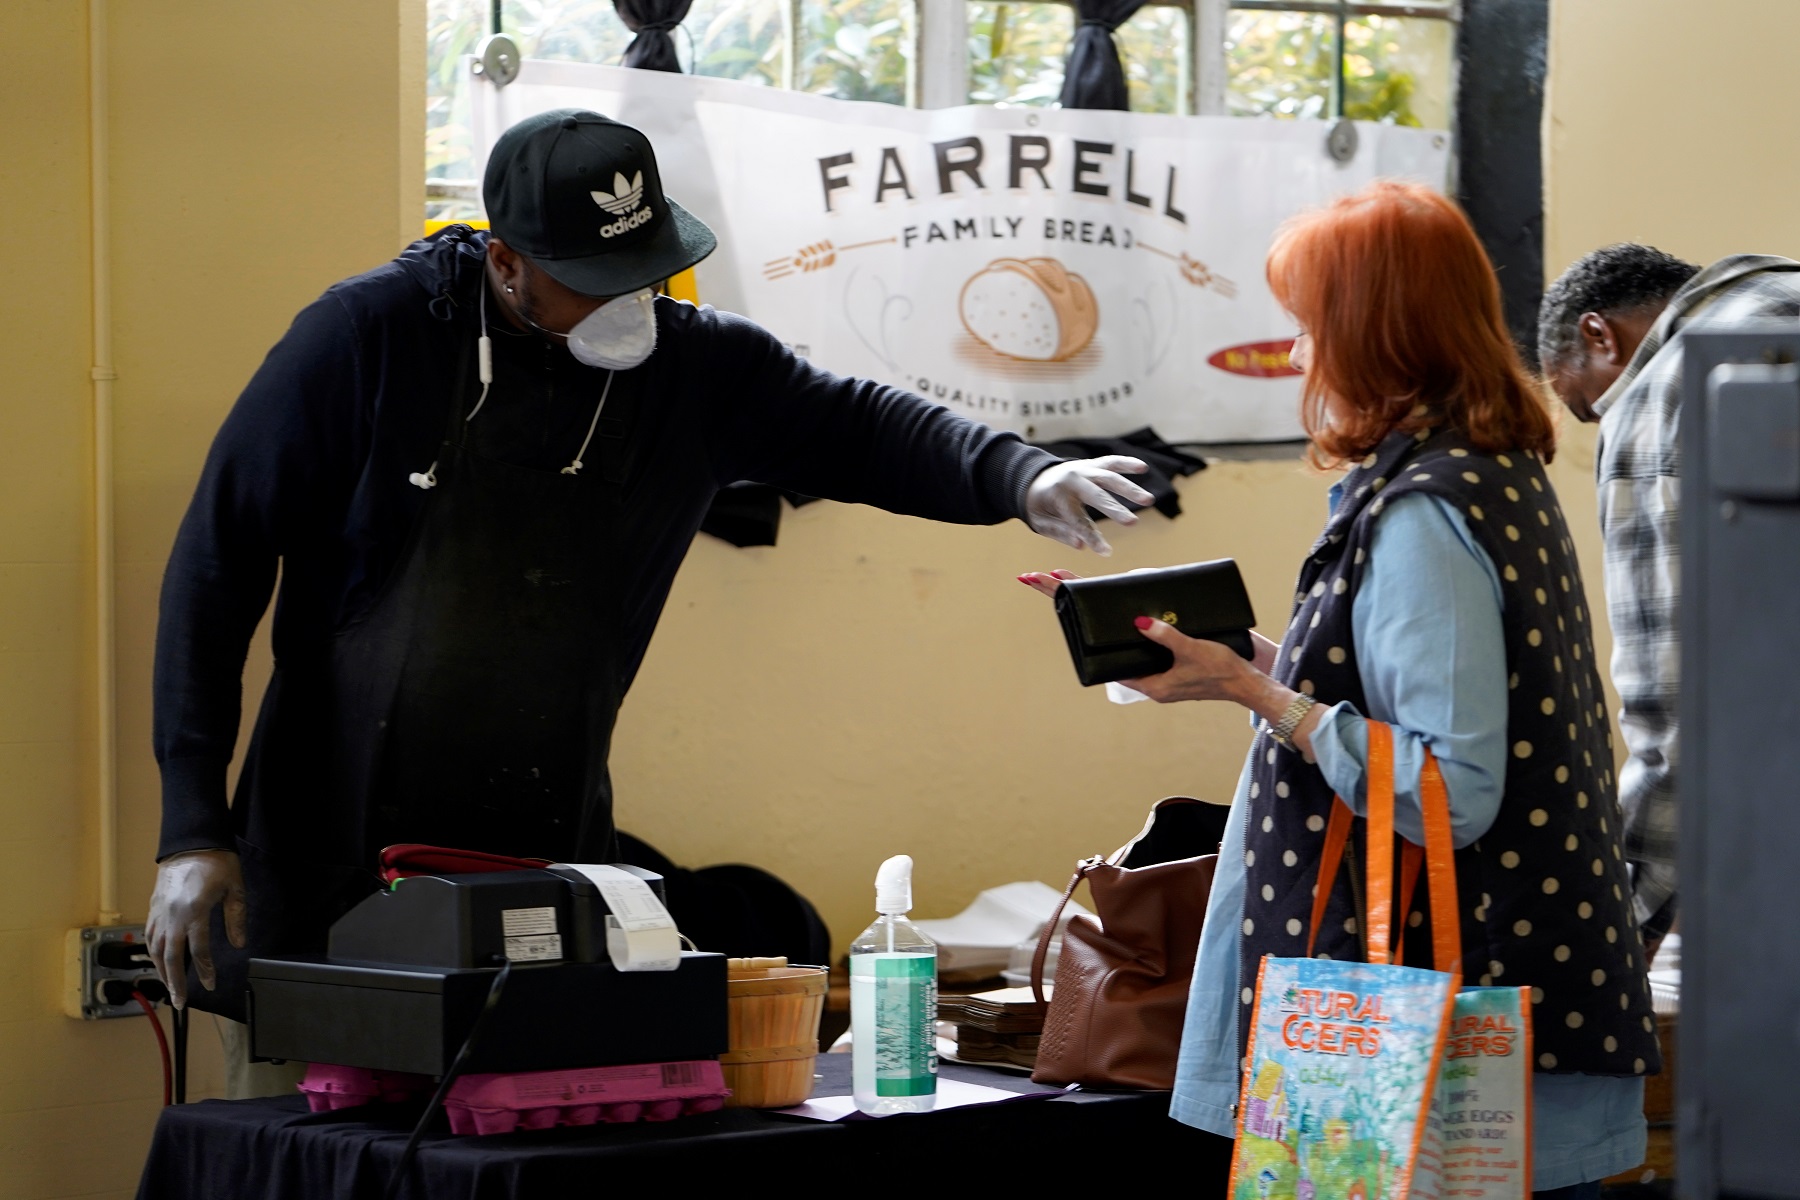 Vendor Cedric McIver gives change back to a customer at the Farmers Public Market in Oklahoma City, Oklahoma, U.S., March 21, 2020. Picture taken March 21, 2020. REUTERS/Nick Oxford